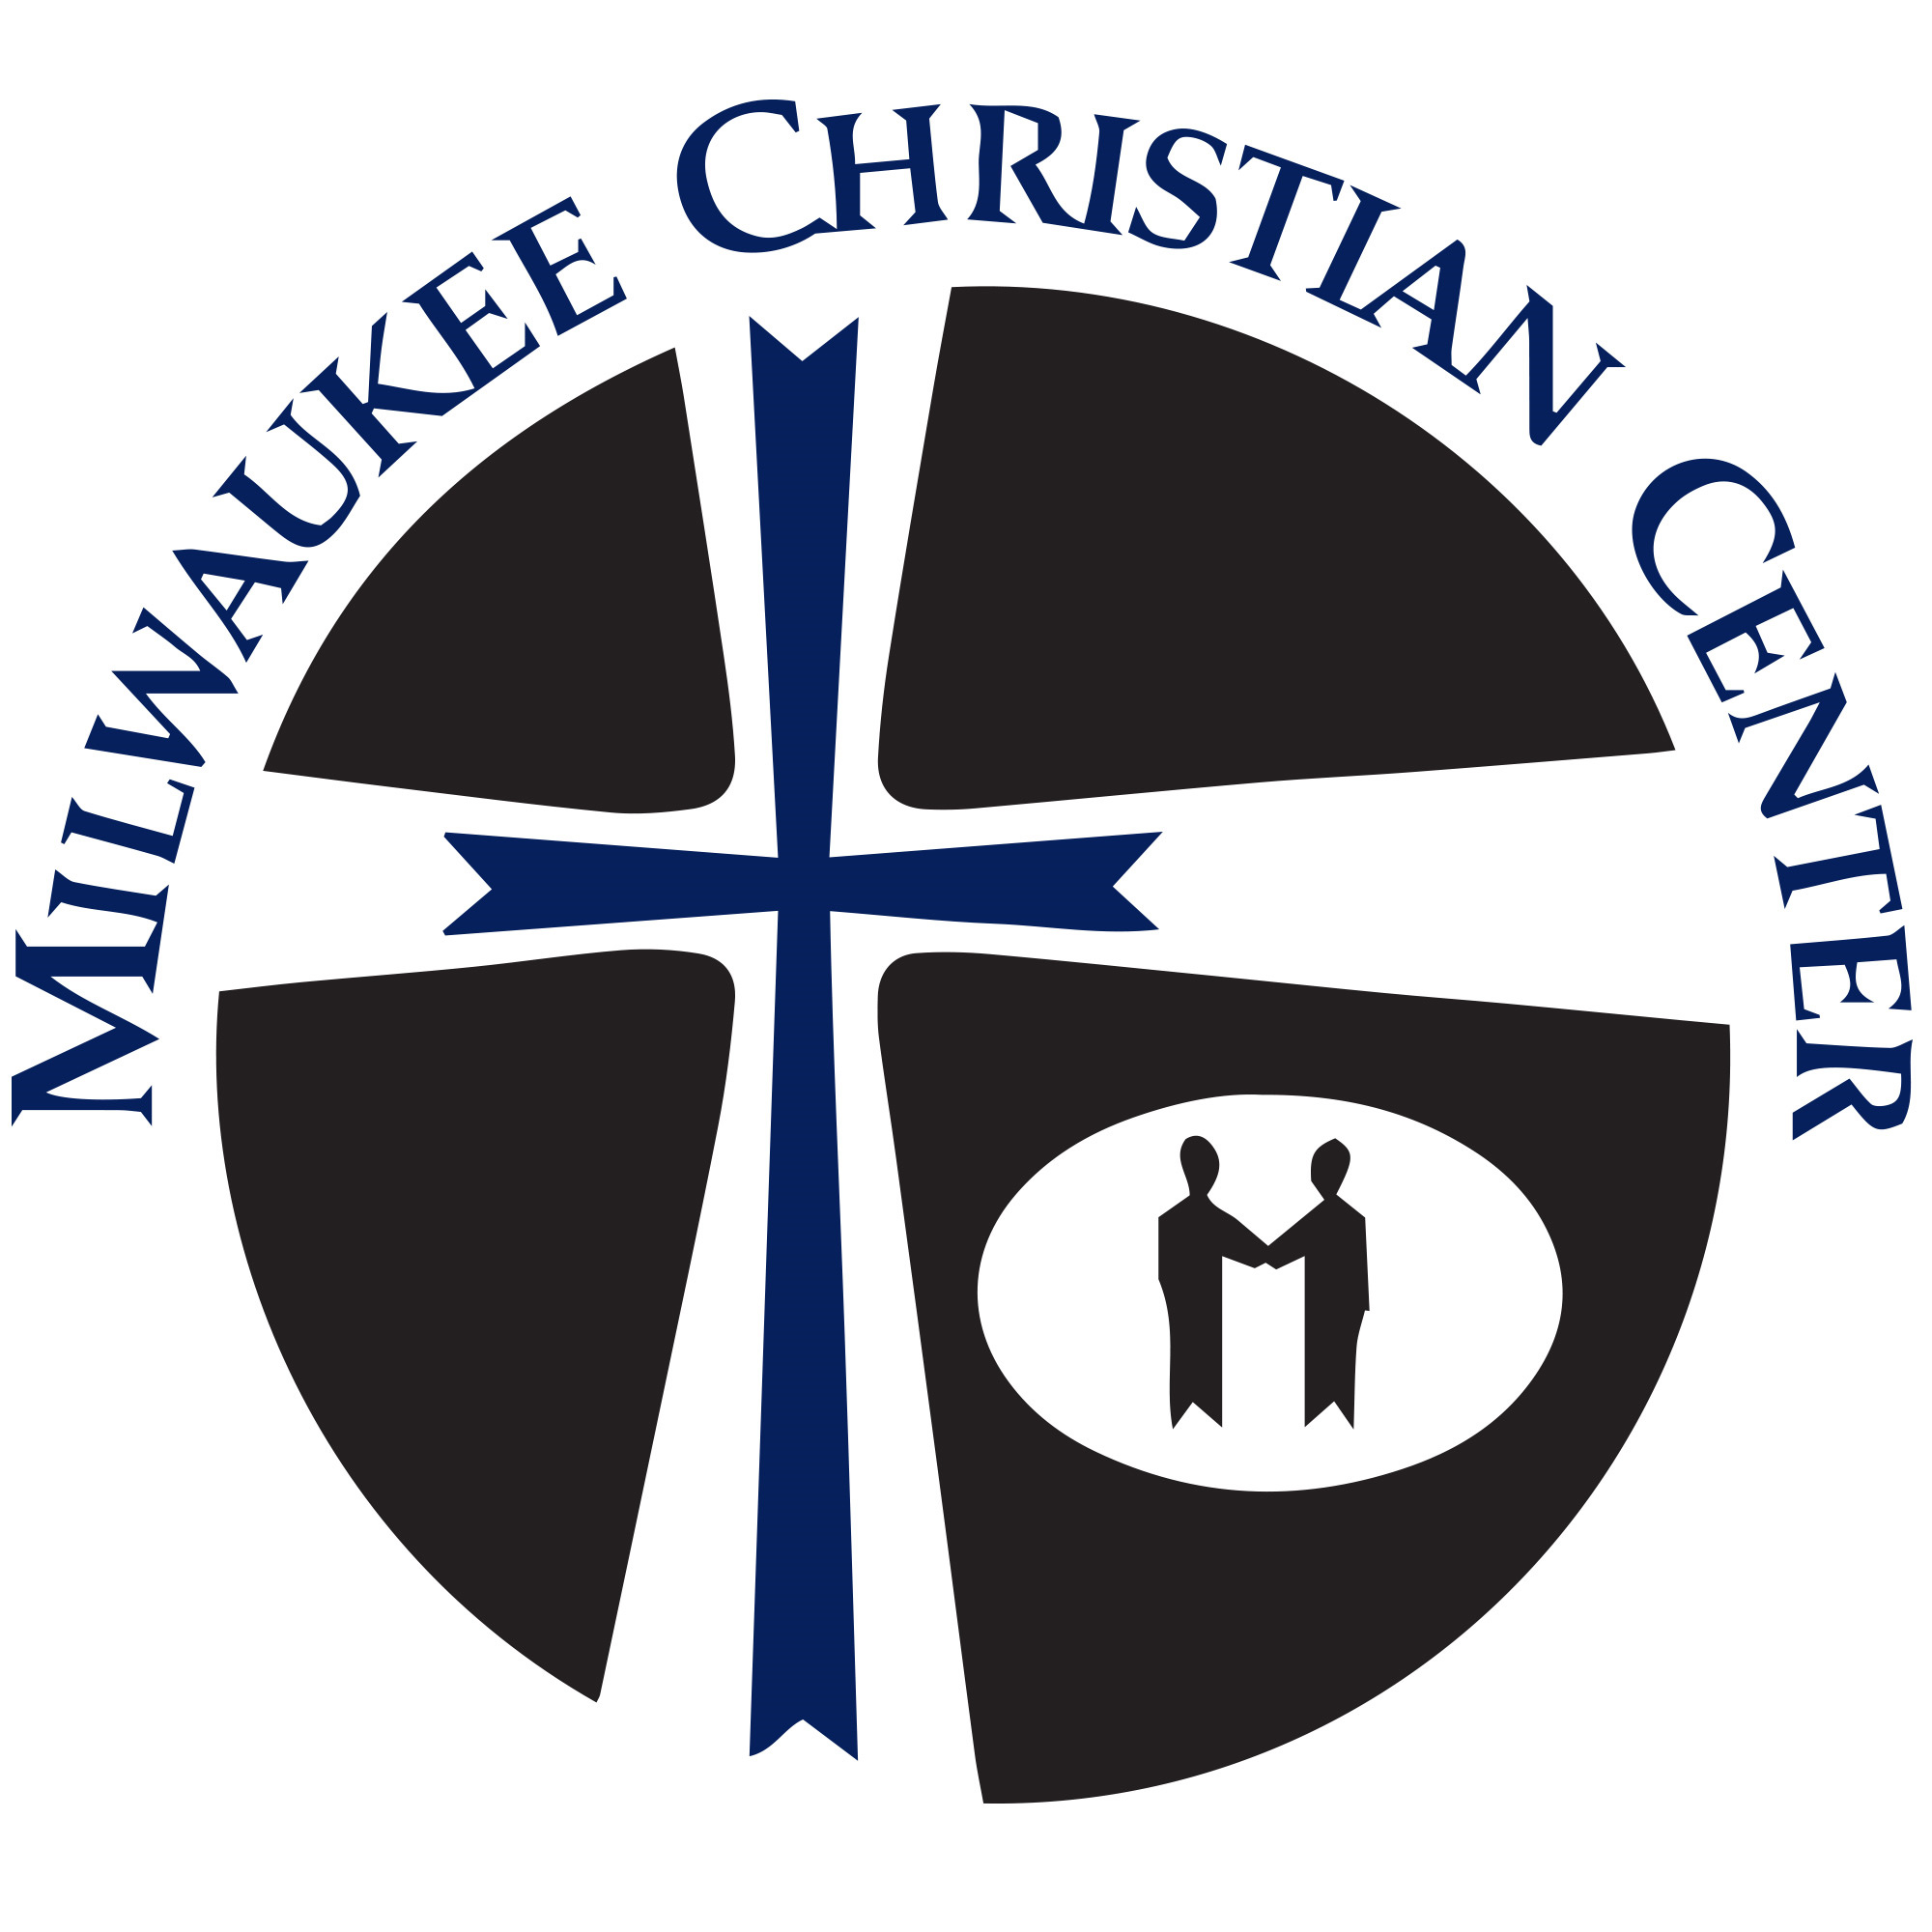 Clippers & Cops Program Partners with Milwaukee Christian Center to Invade Cyber High School and Educate Teens on Making Good Choices